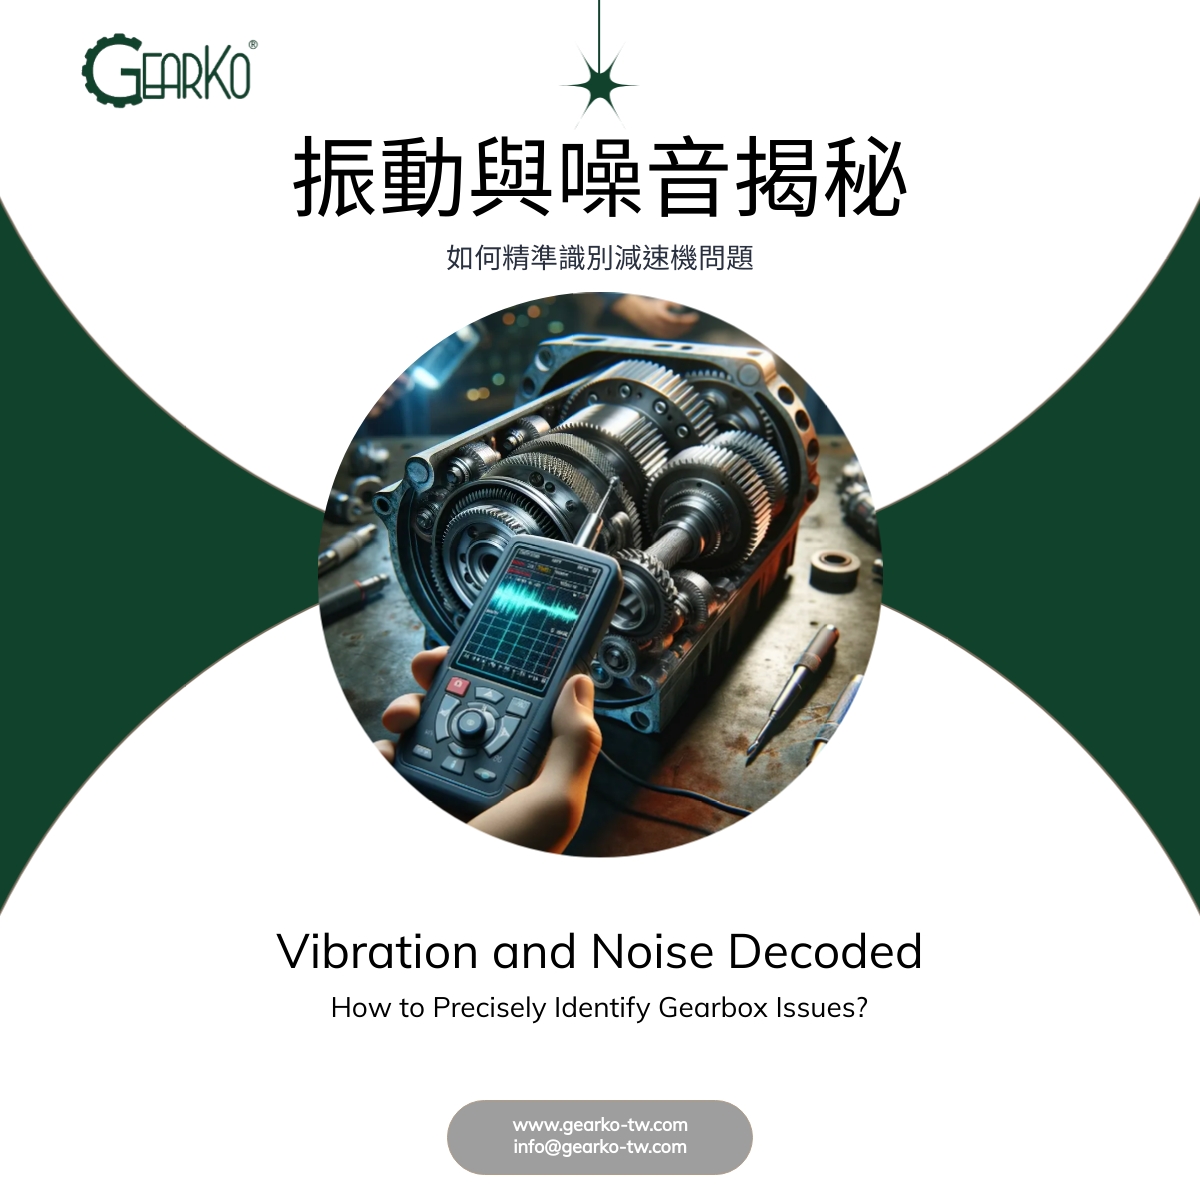 Vibration and Noise Decoded: How to Precisely Identify Gearbox Issues?